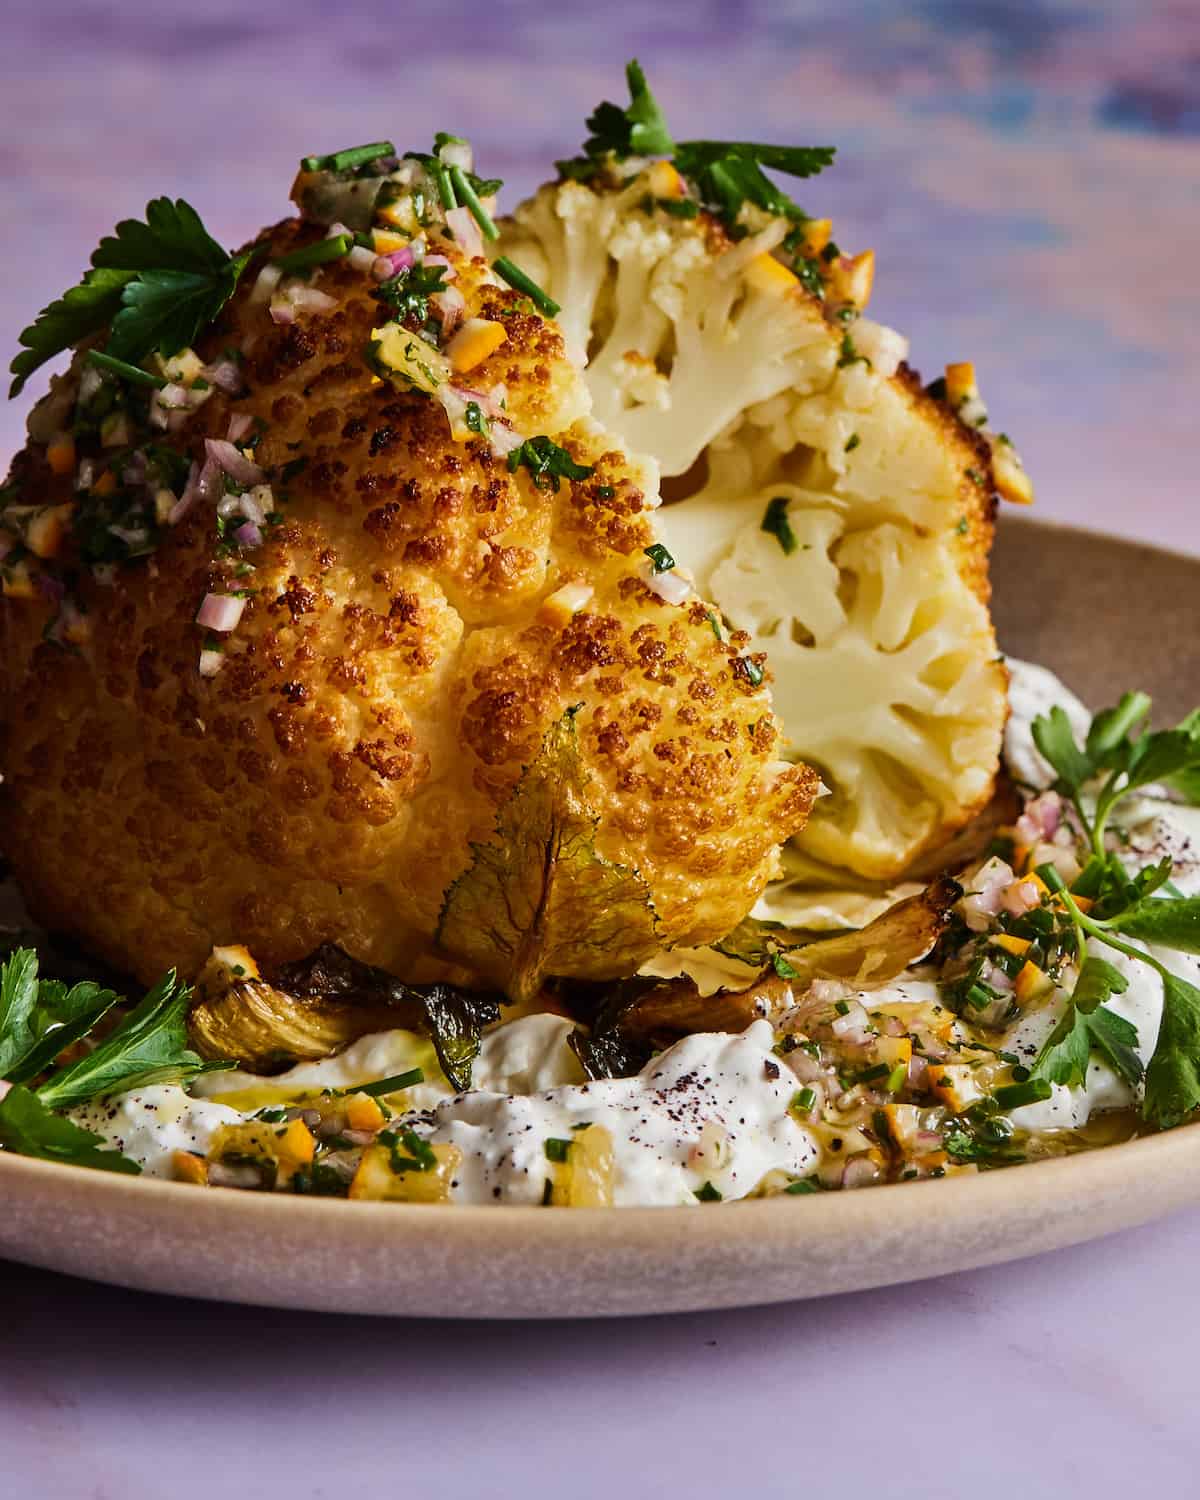 A whole roasted cauliflower garnished with herbs placed on top of a bed of labneh in a beige color ceramic plate.